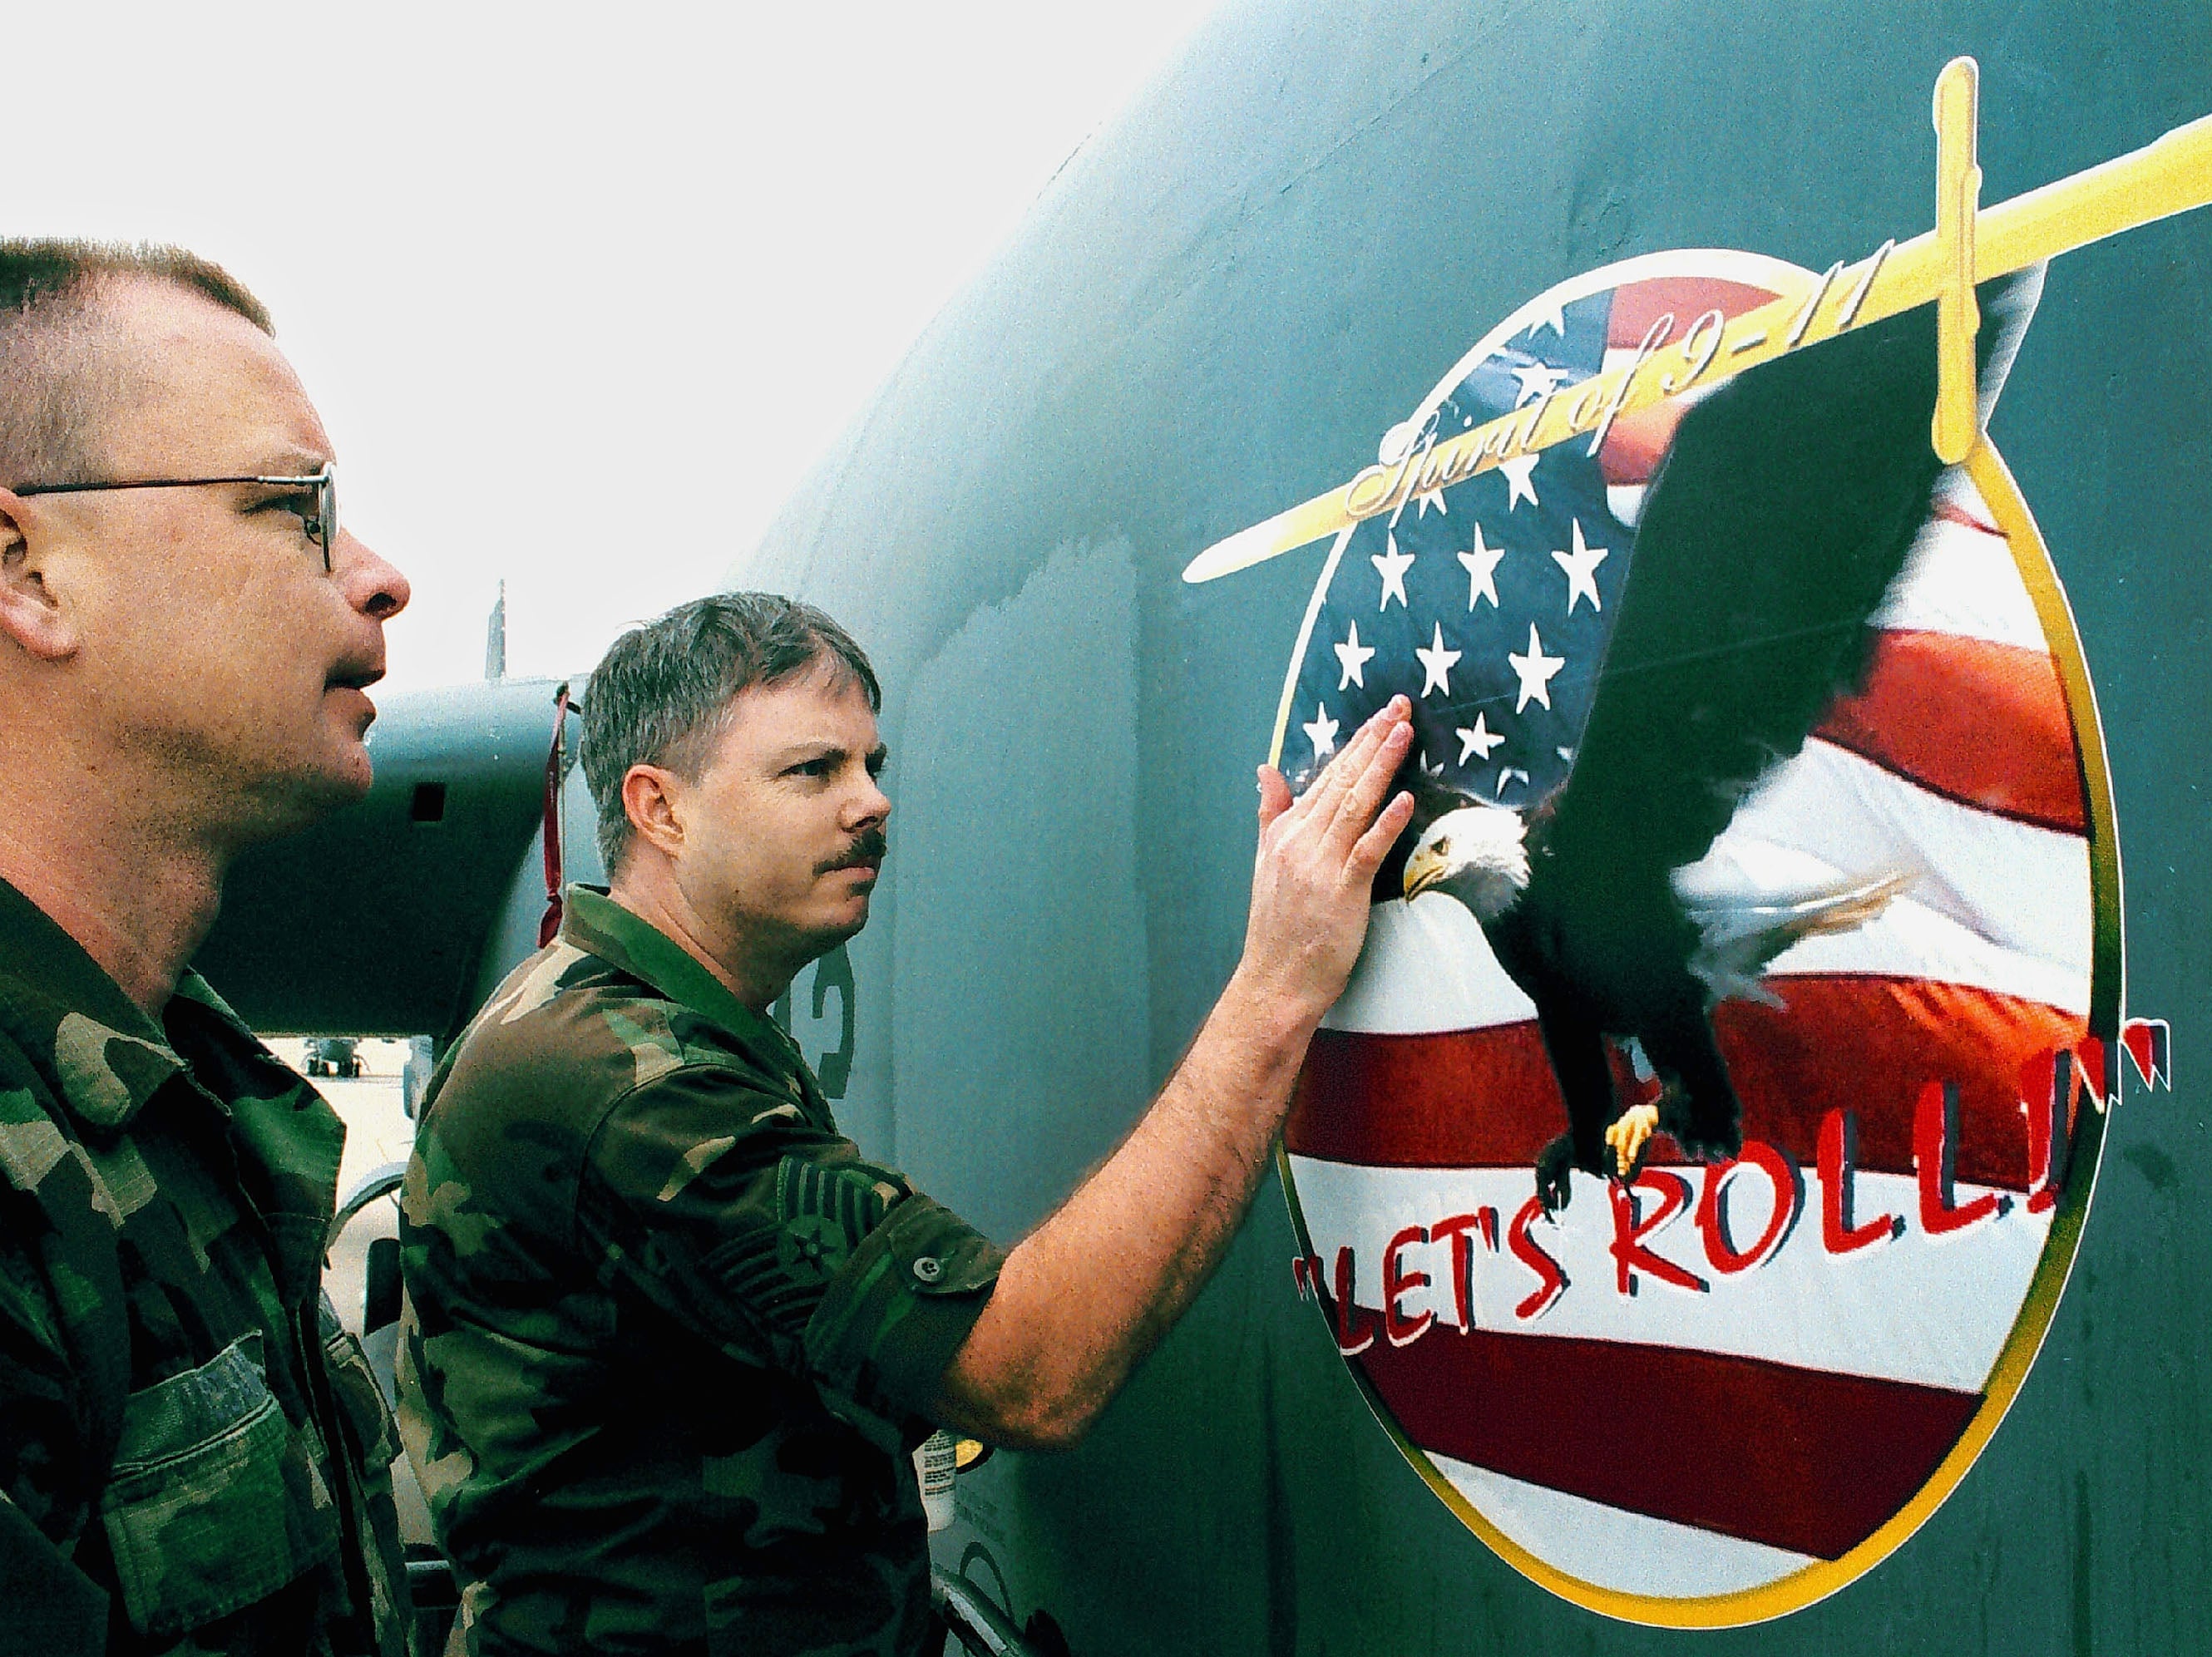 U.S. Air Force Reservists Tech. Sgt. Ron (L) and Staff Sgt. Brian of the 93rd Bomber Squadron apply a decal with the phrase "Lets Roll" to the side of a B-52 bomber February 20, 2002